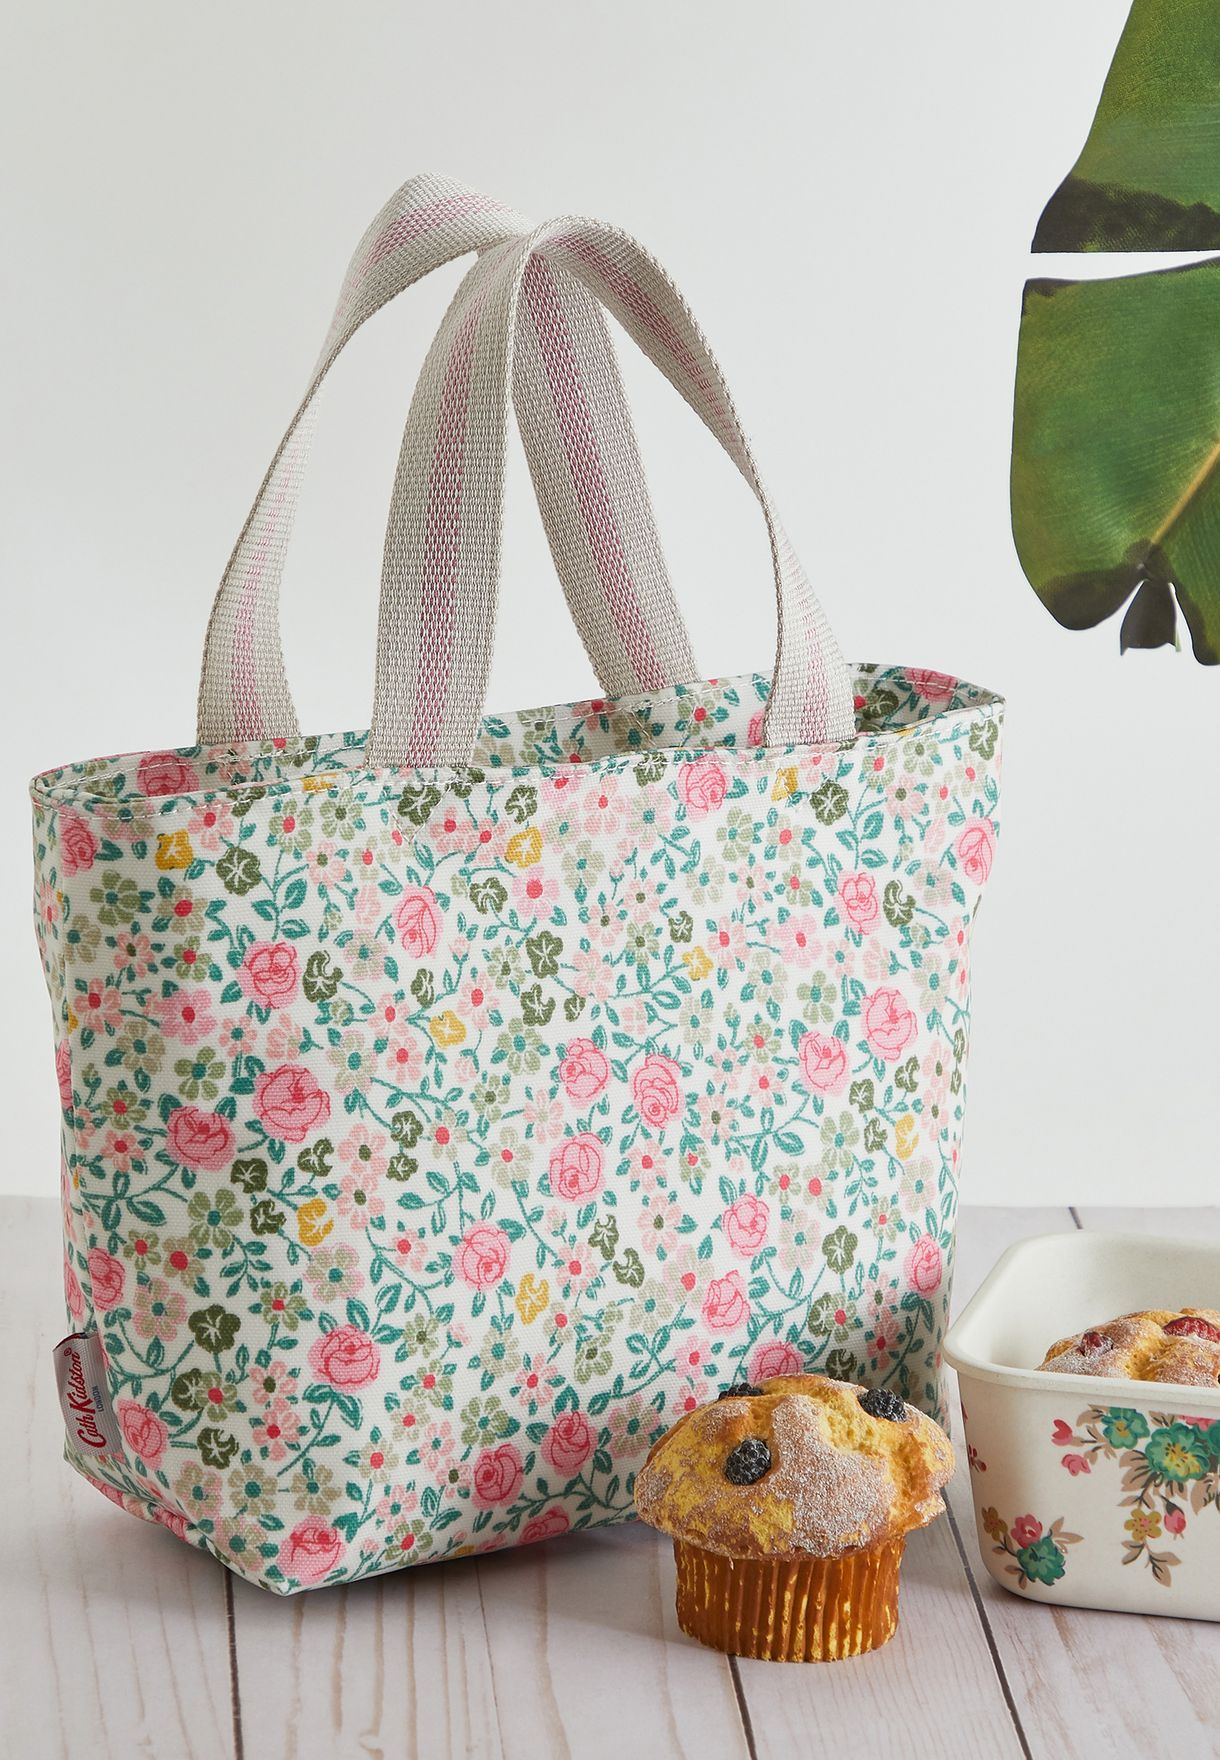 Cath Kidston prints Floral Lunch Tote 